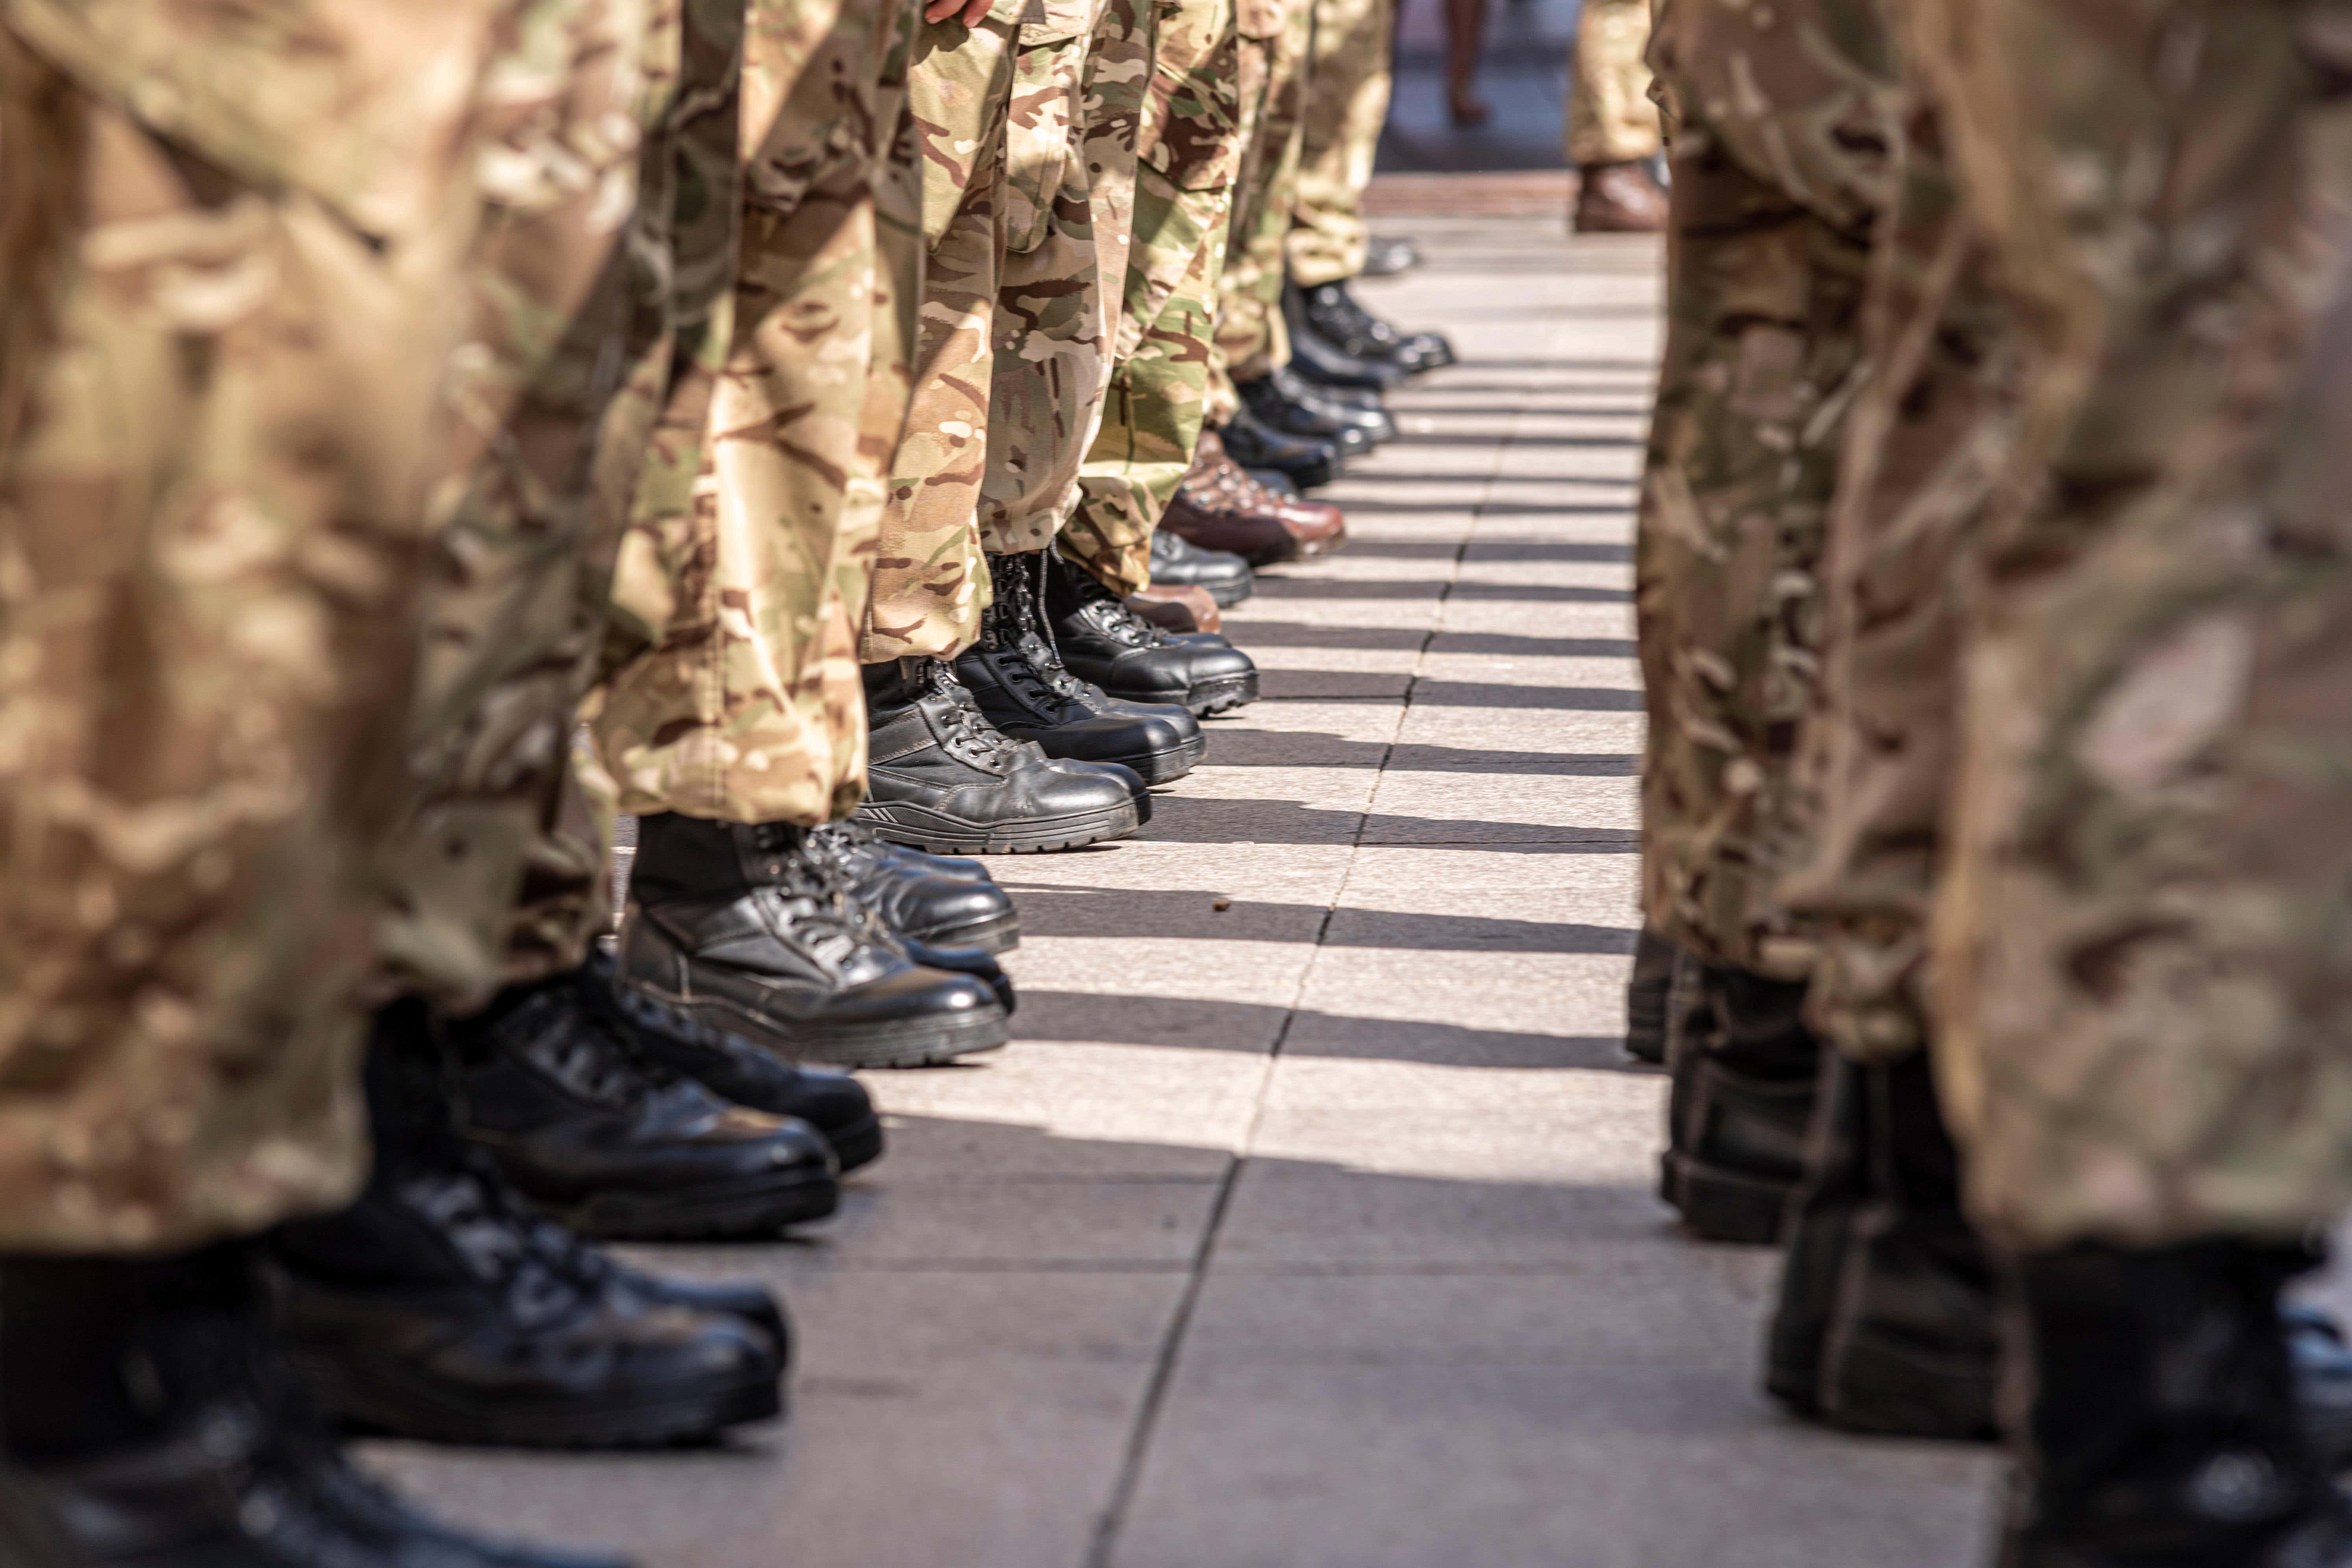 Up to 272,000 service personnel may have been affected by the breach